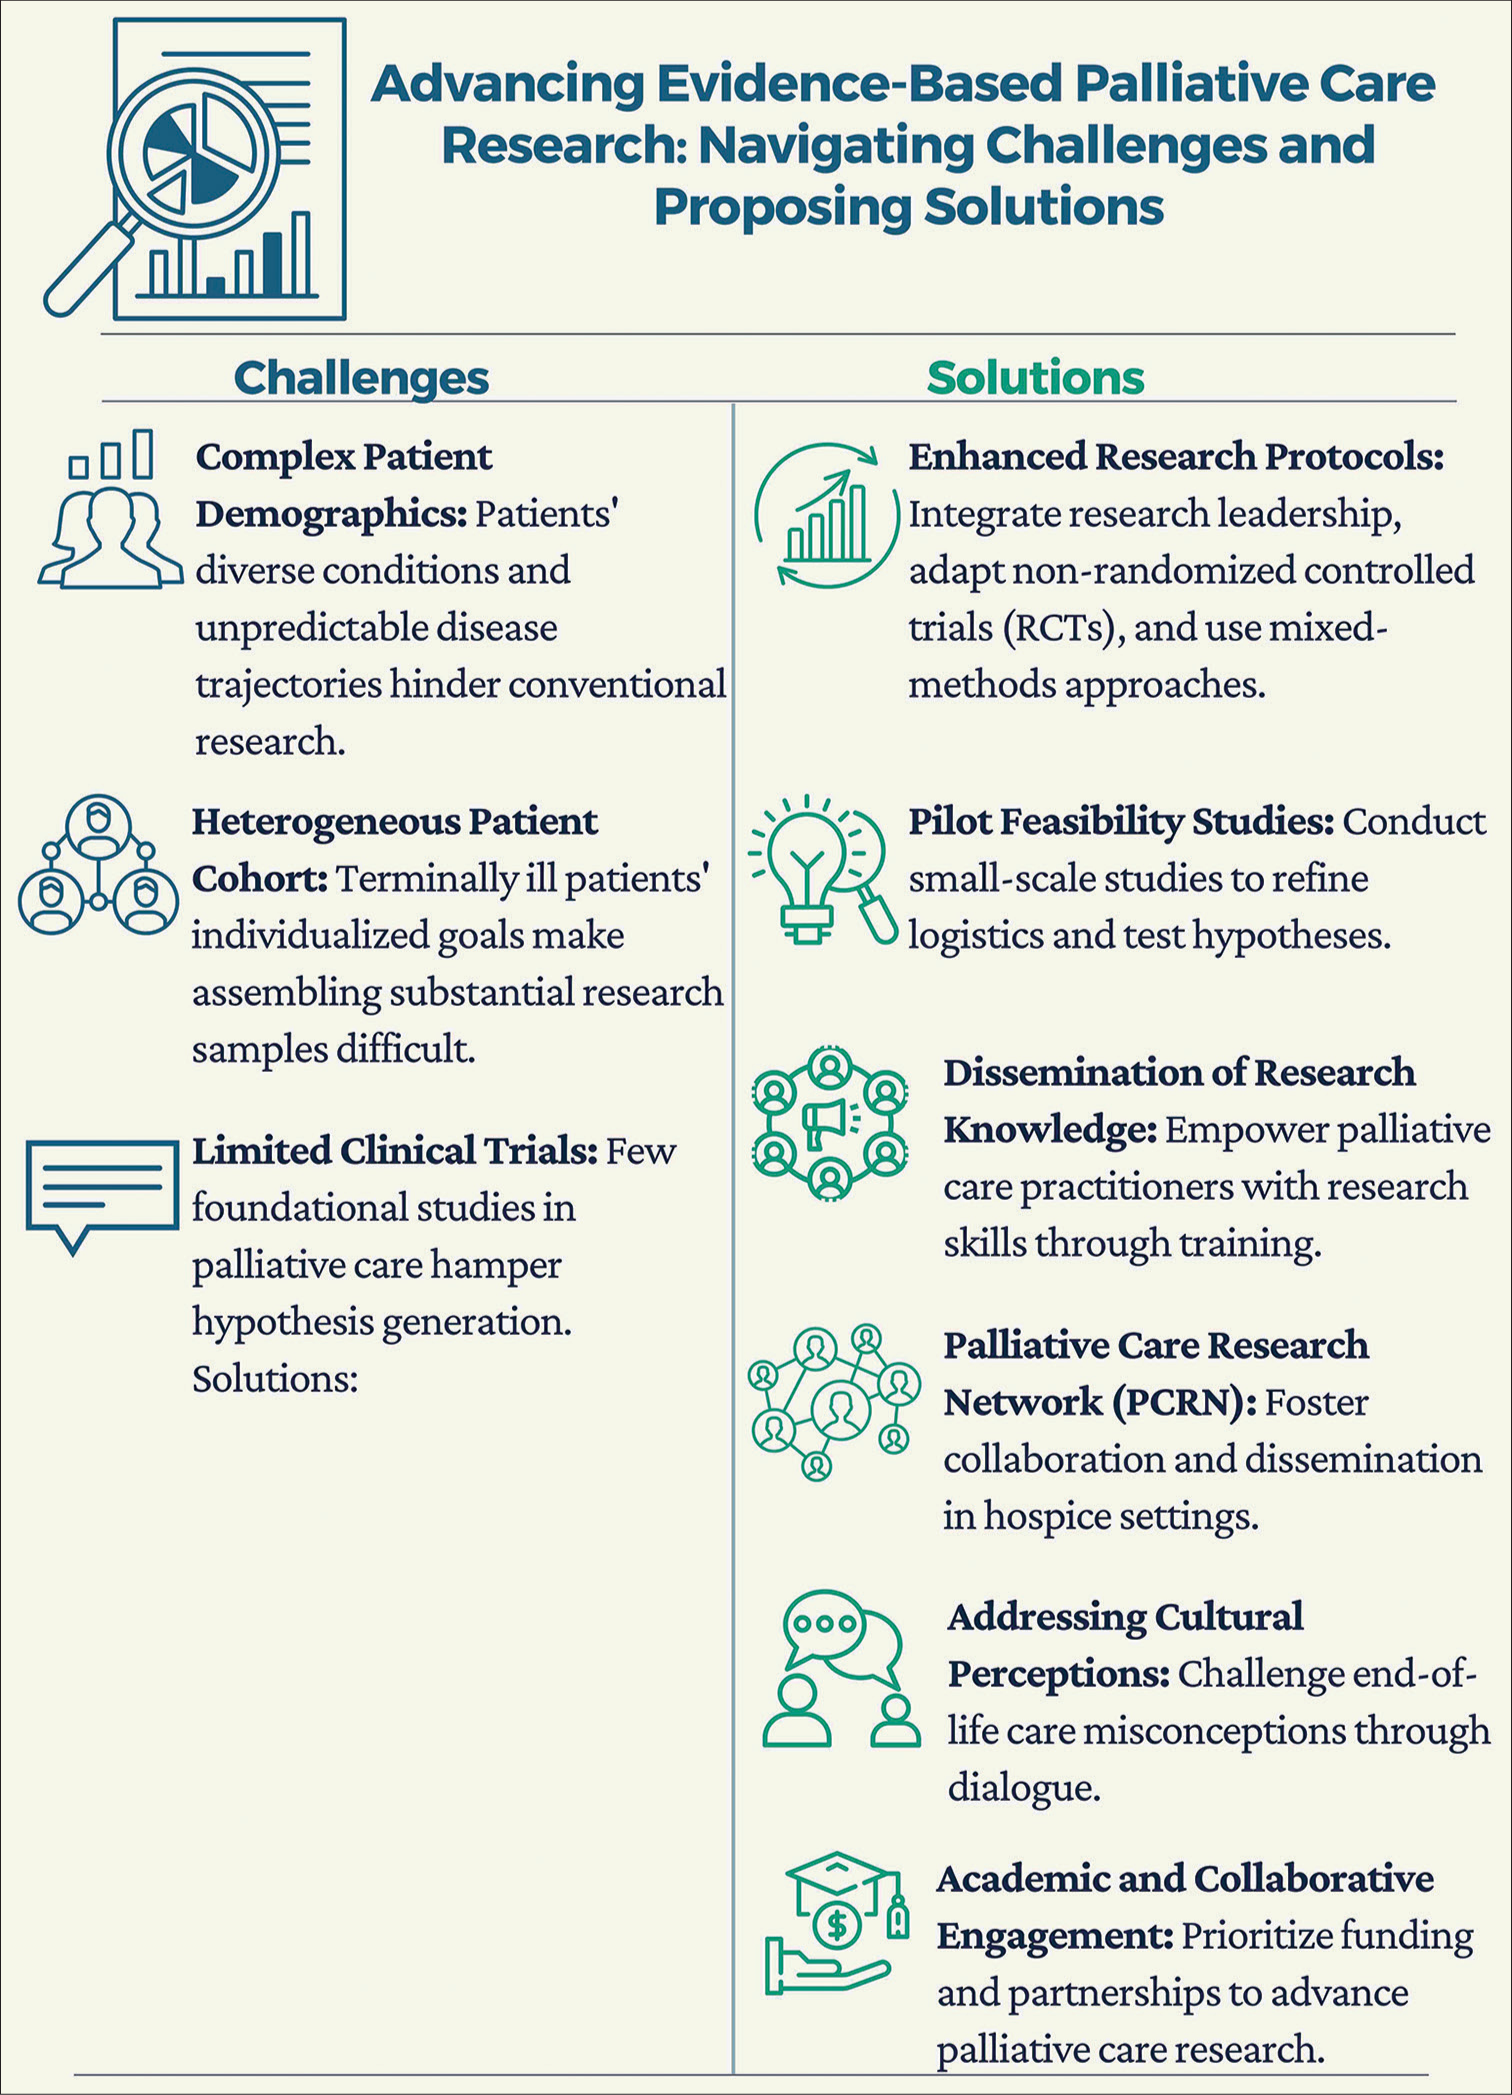 Advancing Evidence-based Palliative Care Research: Navigating Challenges and Proposing Solutions